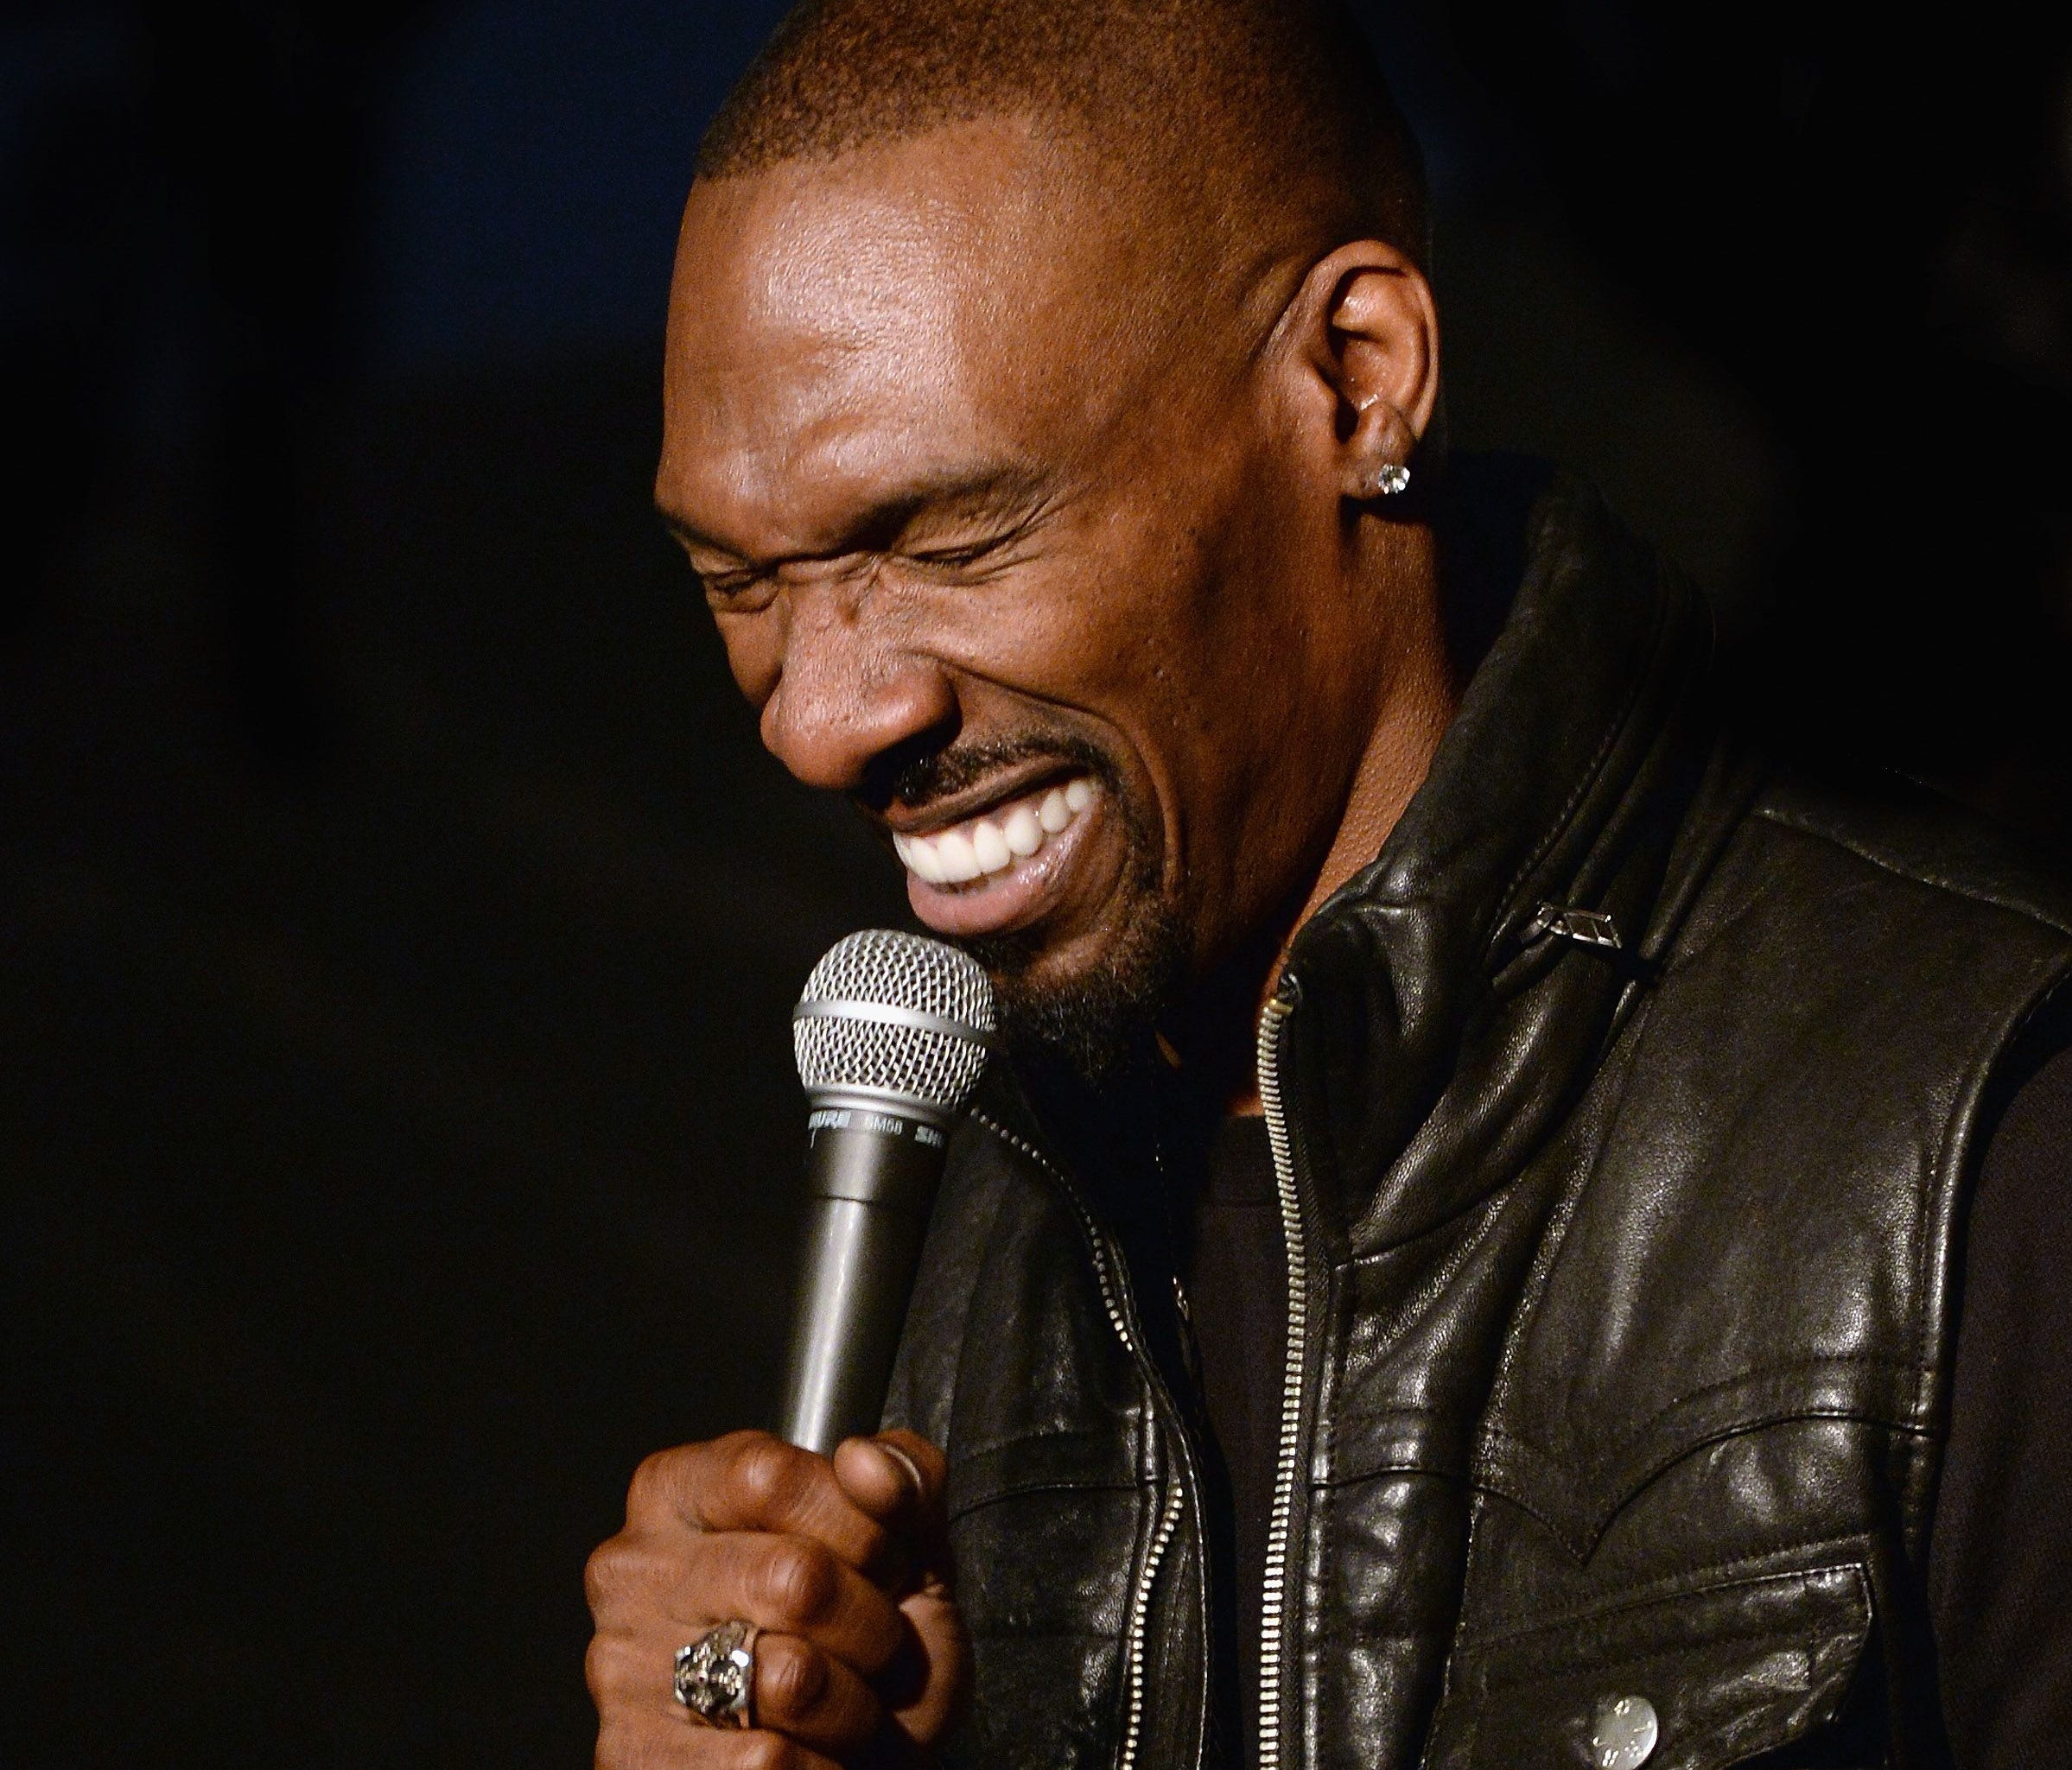 Without Charlie Murphy, we'd have no 